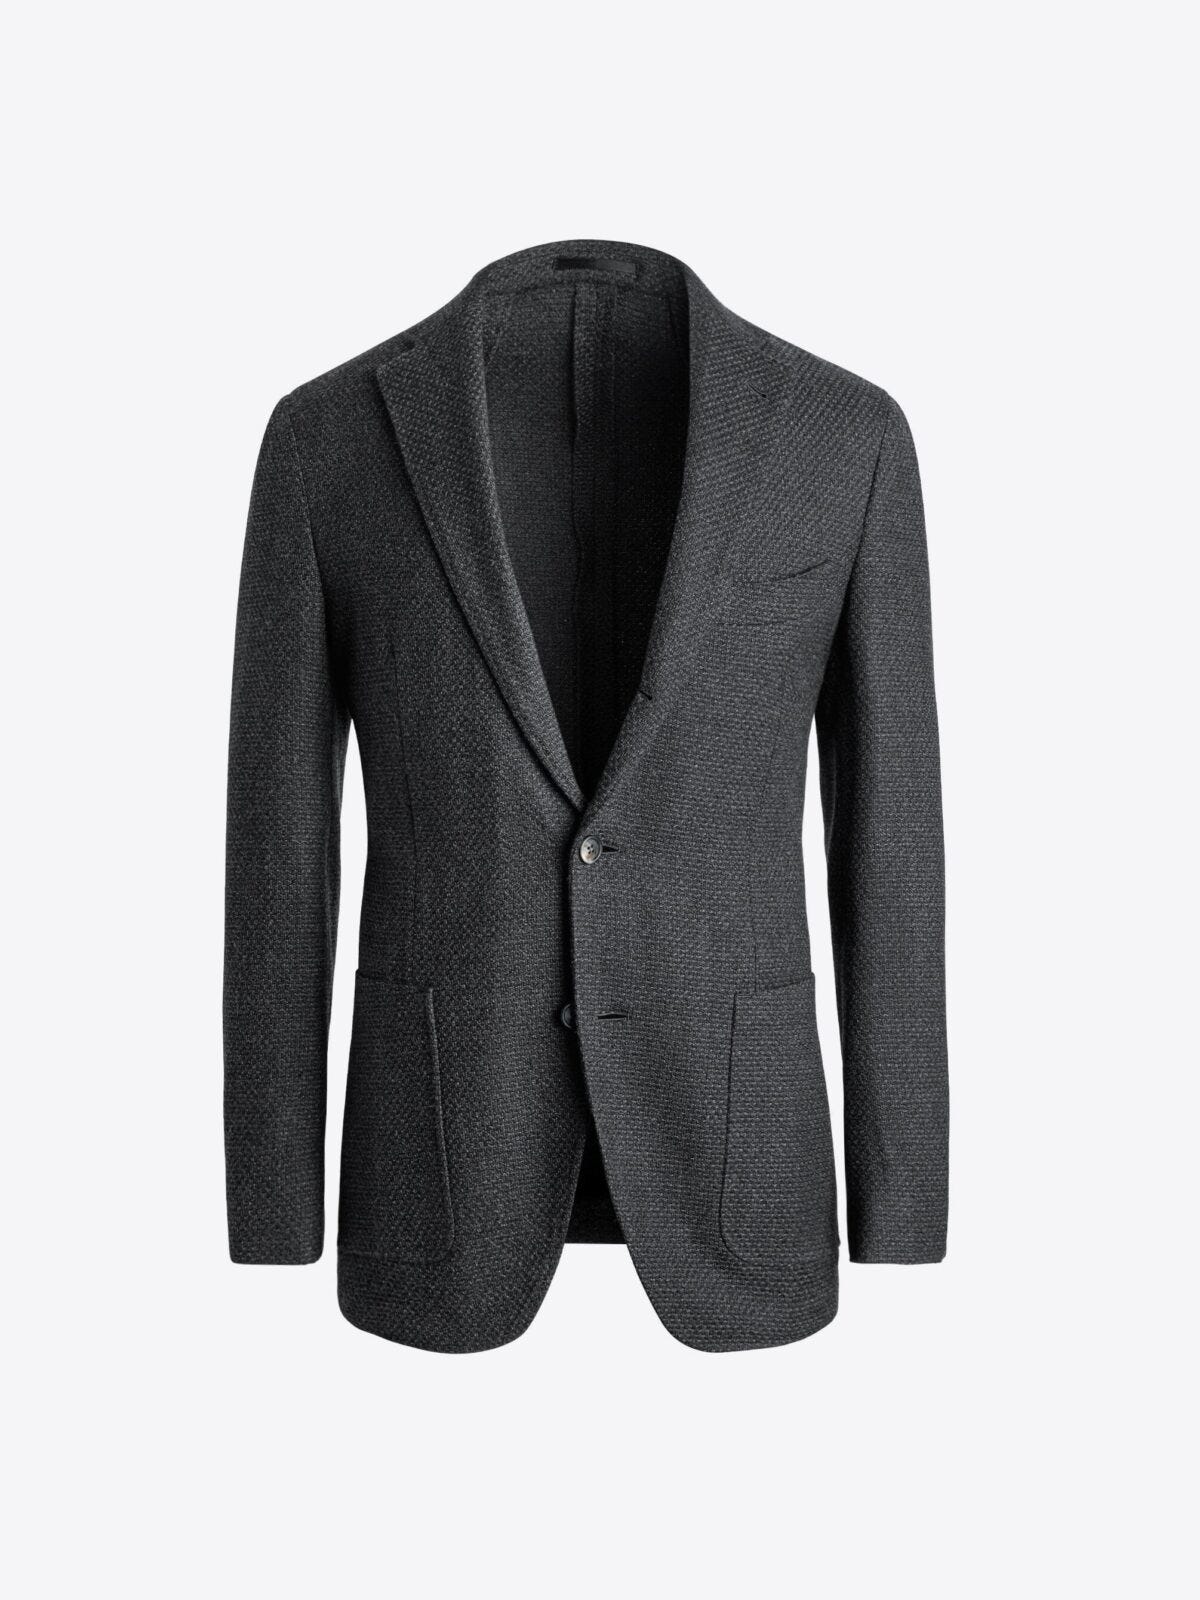 Charcoal Textured Wool Waverly Jacket Product